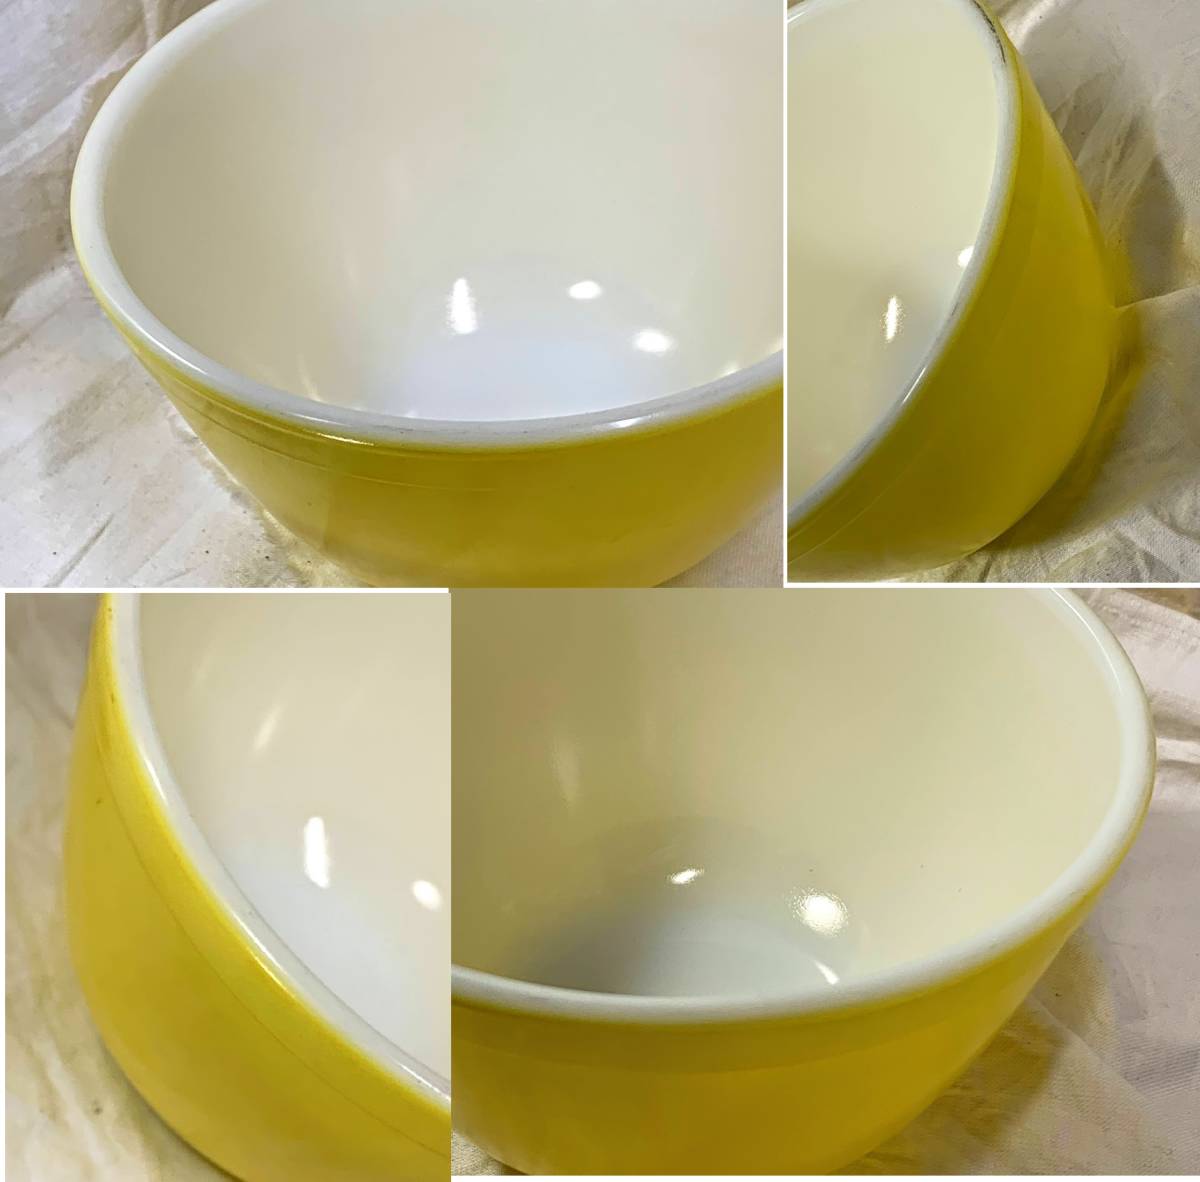 USA Vintage OLD PYREX/ Old Pyrex salad bowl / mixing bowl yellow/ vitamin yellow heat-resisting glass used collection 